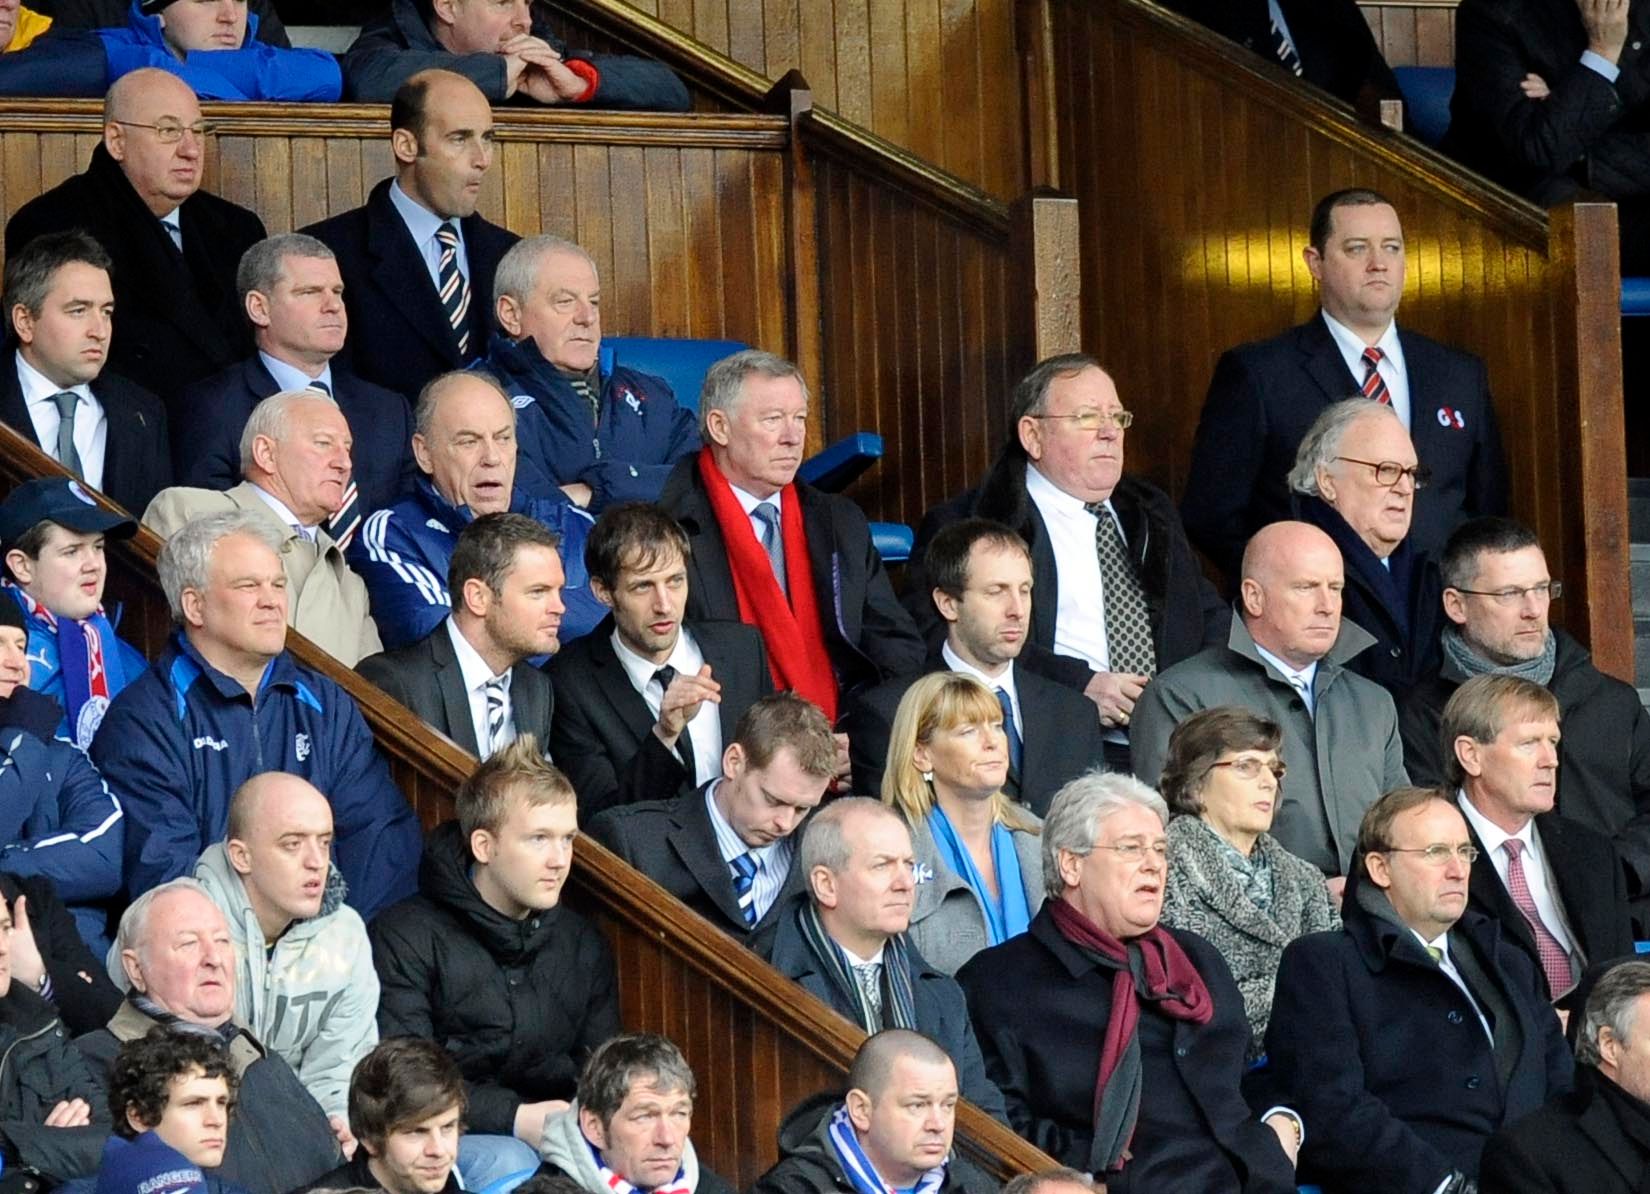 RANGERS V CELTIC SCOTTISH CUP 5TH ROUND.
PIC SHOWS - MARTIN BAIN, WALTER SMITH, ALEX FERGUSON, PETER HOUSTON AND CRAIG LEVEIN IN THE STAND